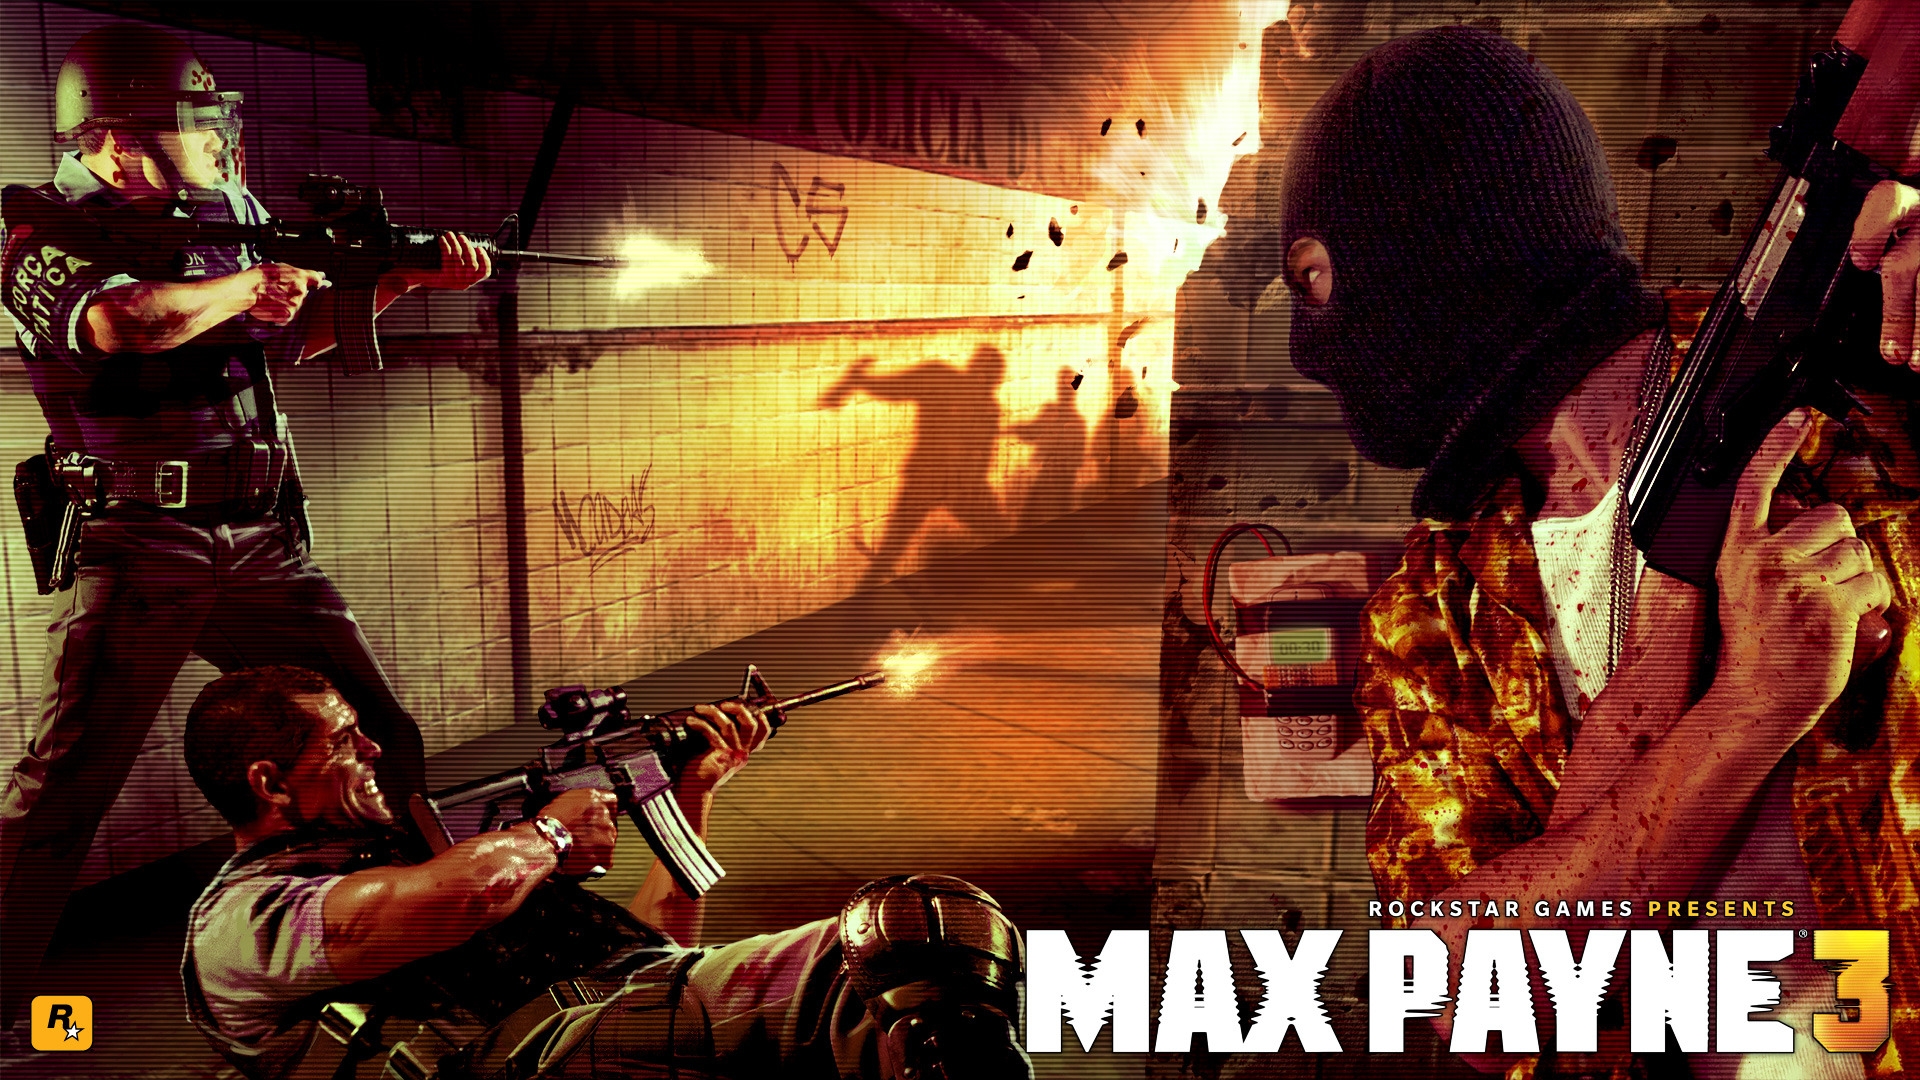 Maxpayne3 Local Justice for 1920 x 1080 HDTV 1080p resolution